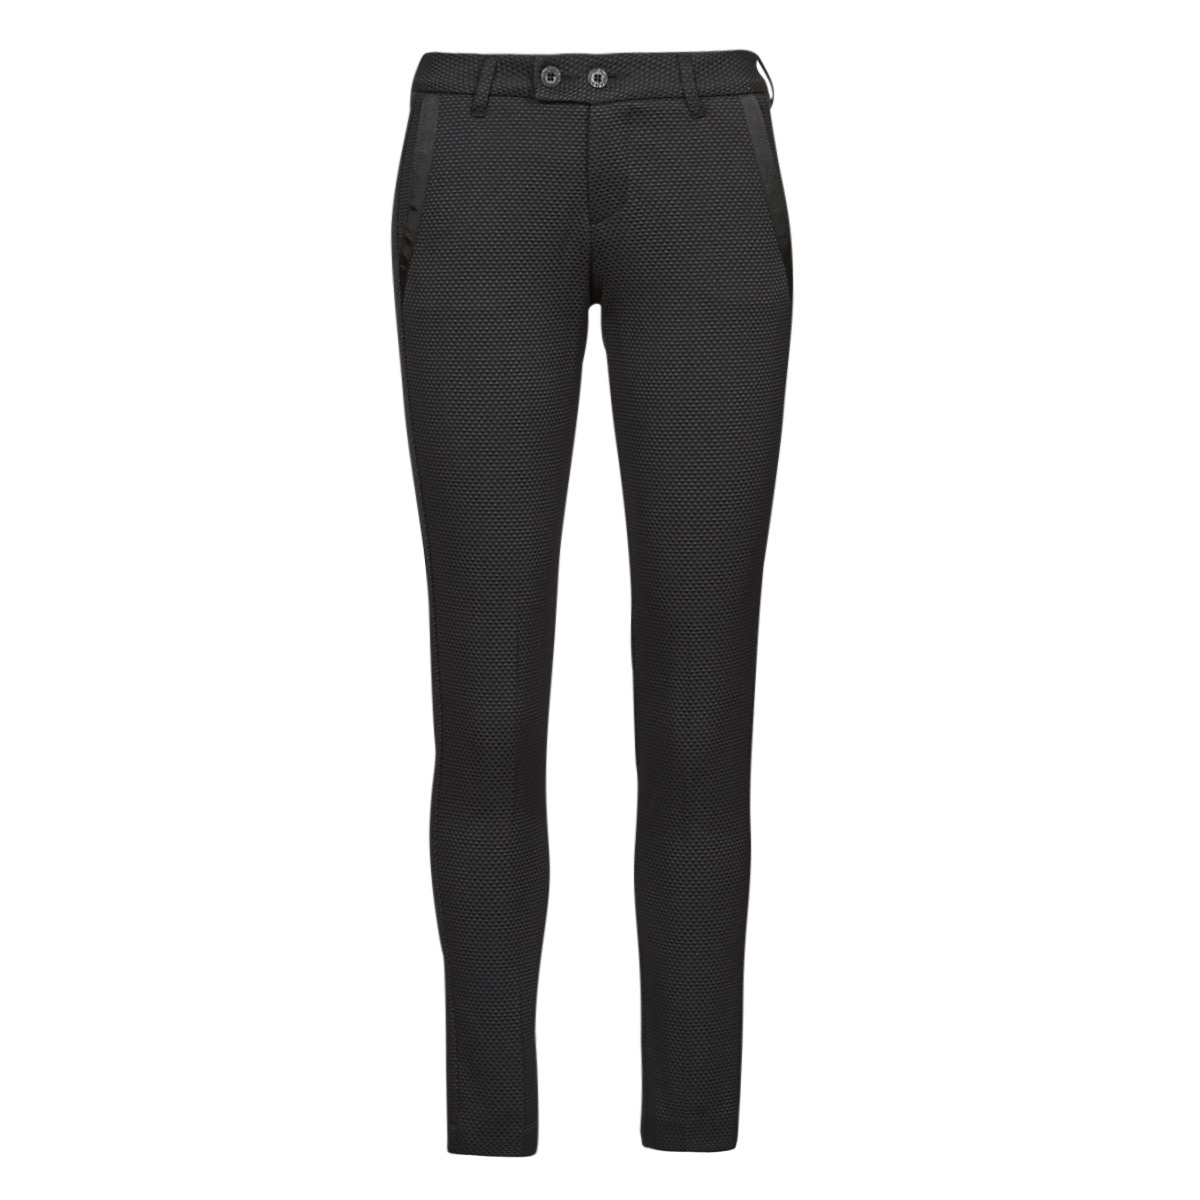 Trousers in Black at Spartoo GOOFASH